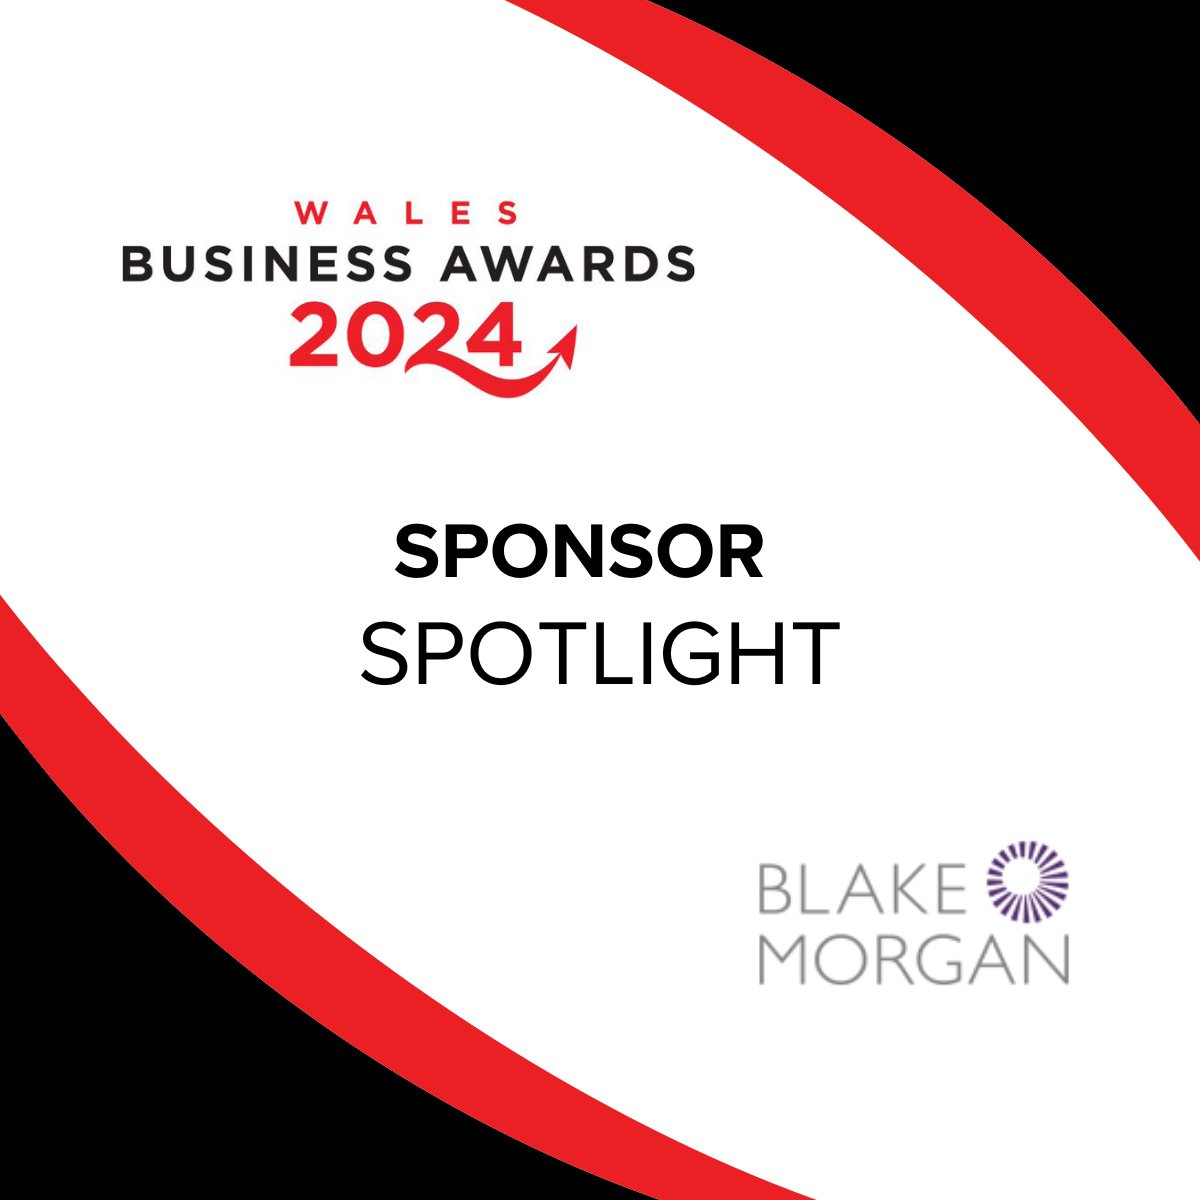 Our B2C Customer Commitment Award recognises excellent consumer customer service and @BlakeMorganLLP is sponsoring this award! Find out more: cw-seswm.com/news/introduci…